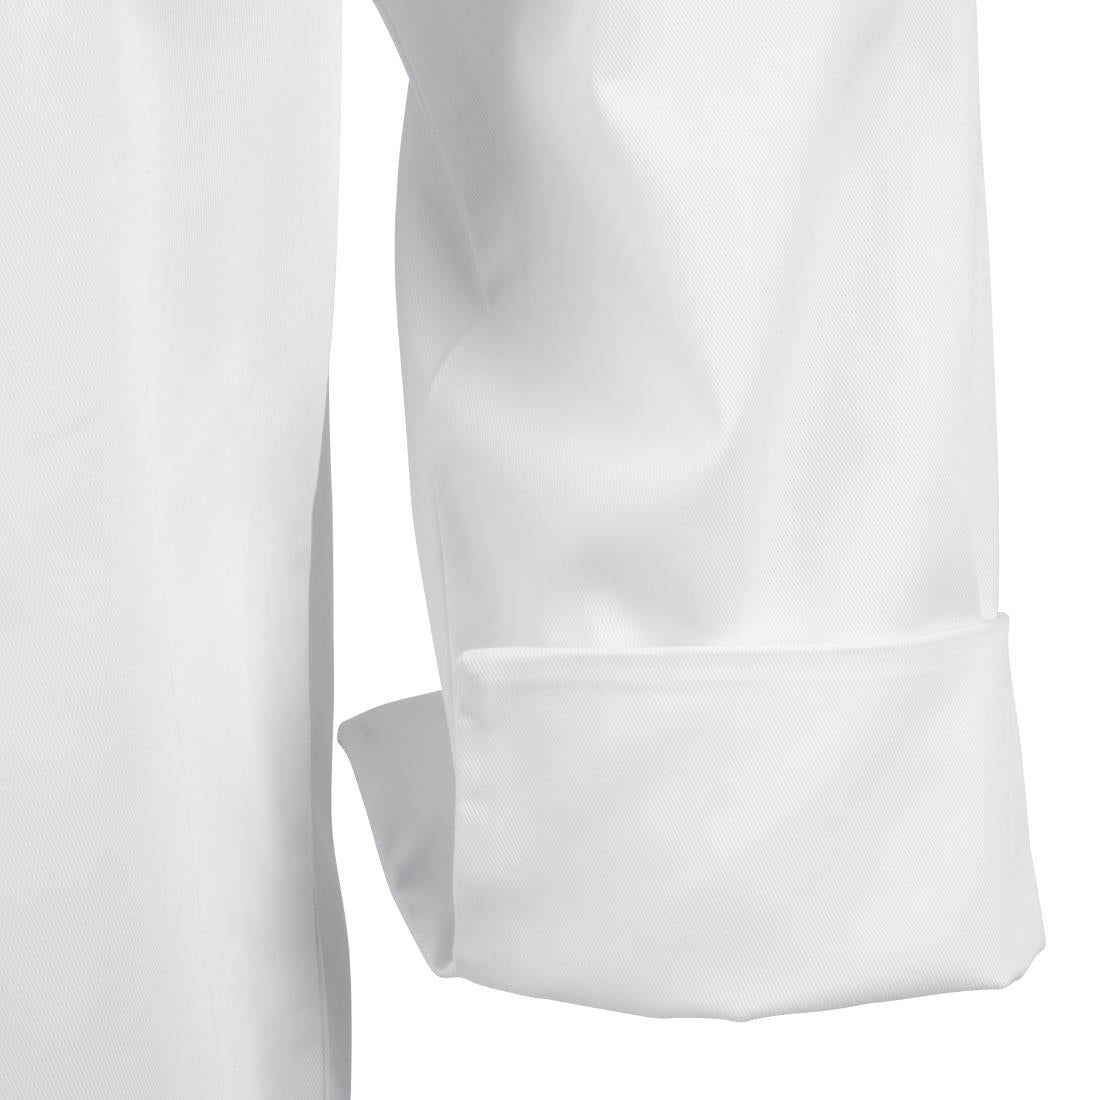 Chef Works Le Mans Chefs Jacket White JD Catering Equipment Solutions Ltd